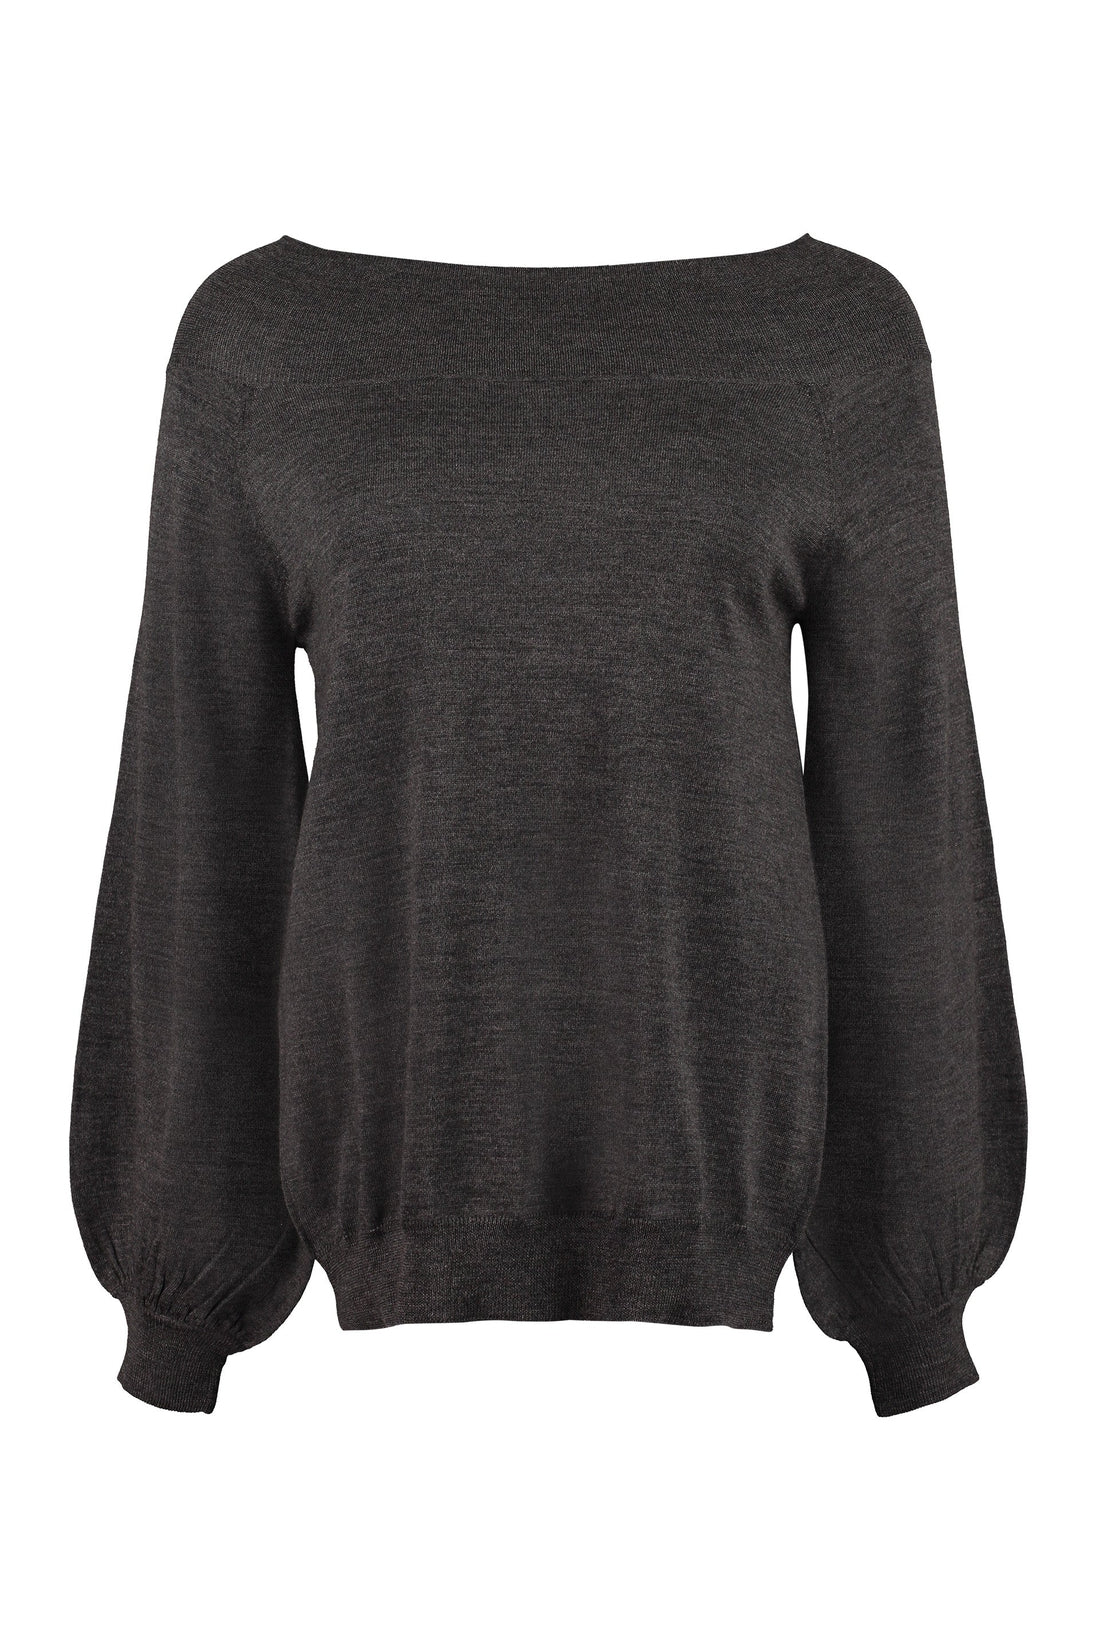 Parosh-OUTLET-SALE-Wool and cashmere pullover-ARCHIVIST